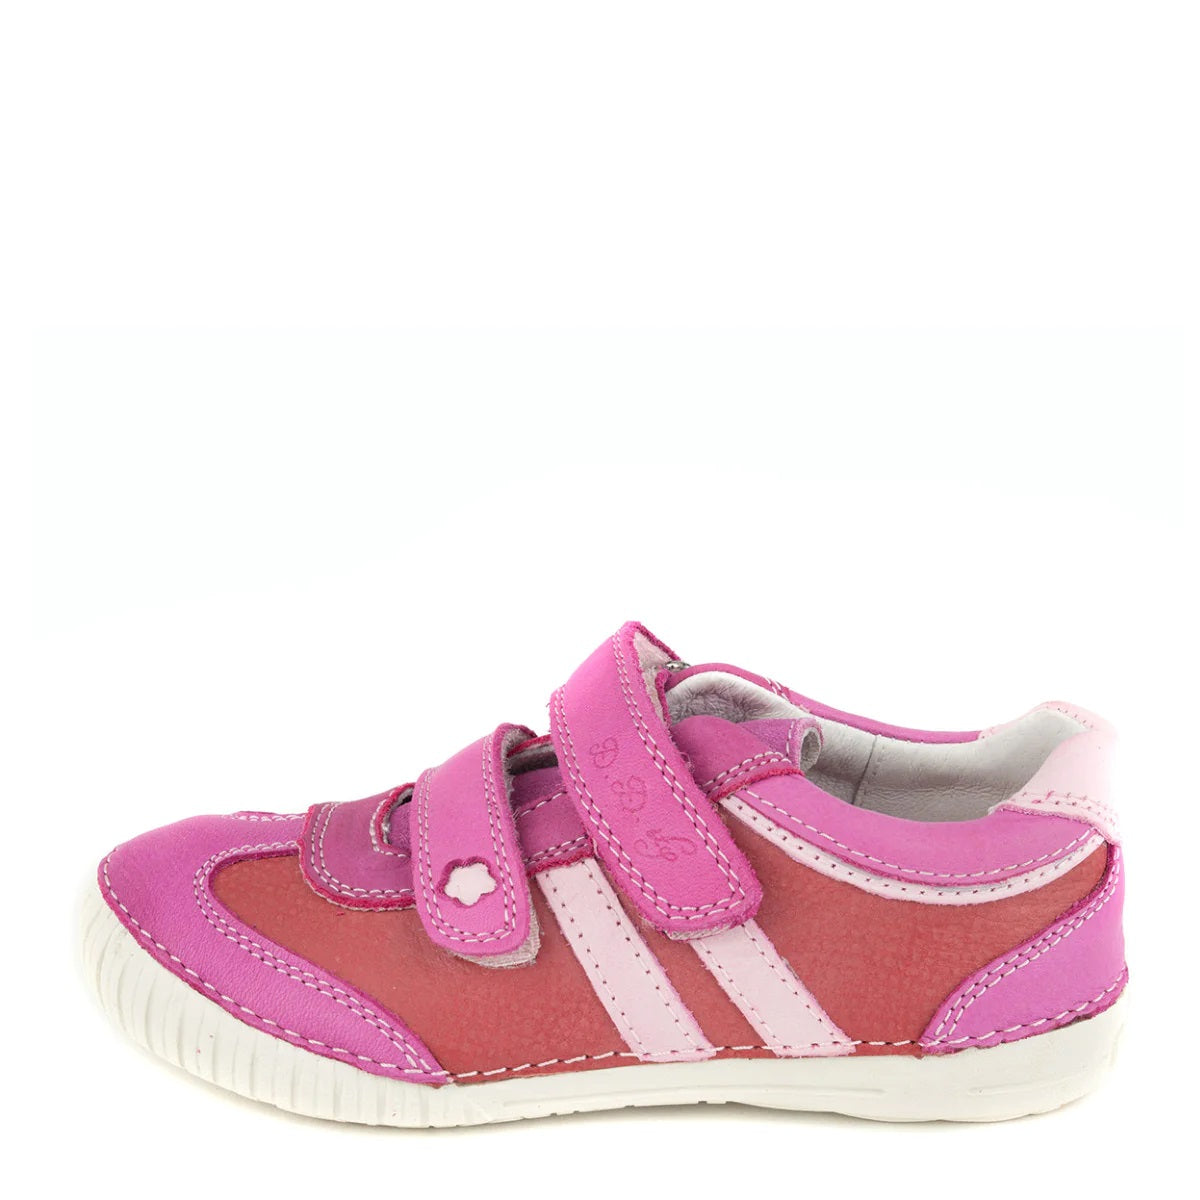 D.D. Step Little Kid Girl Double Strap Shoes Dark Pink - Supportive Leather From Europe Kids Orthopedic - shoekid.ca